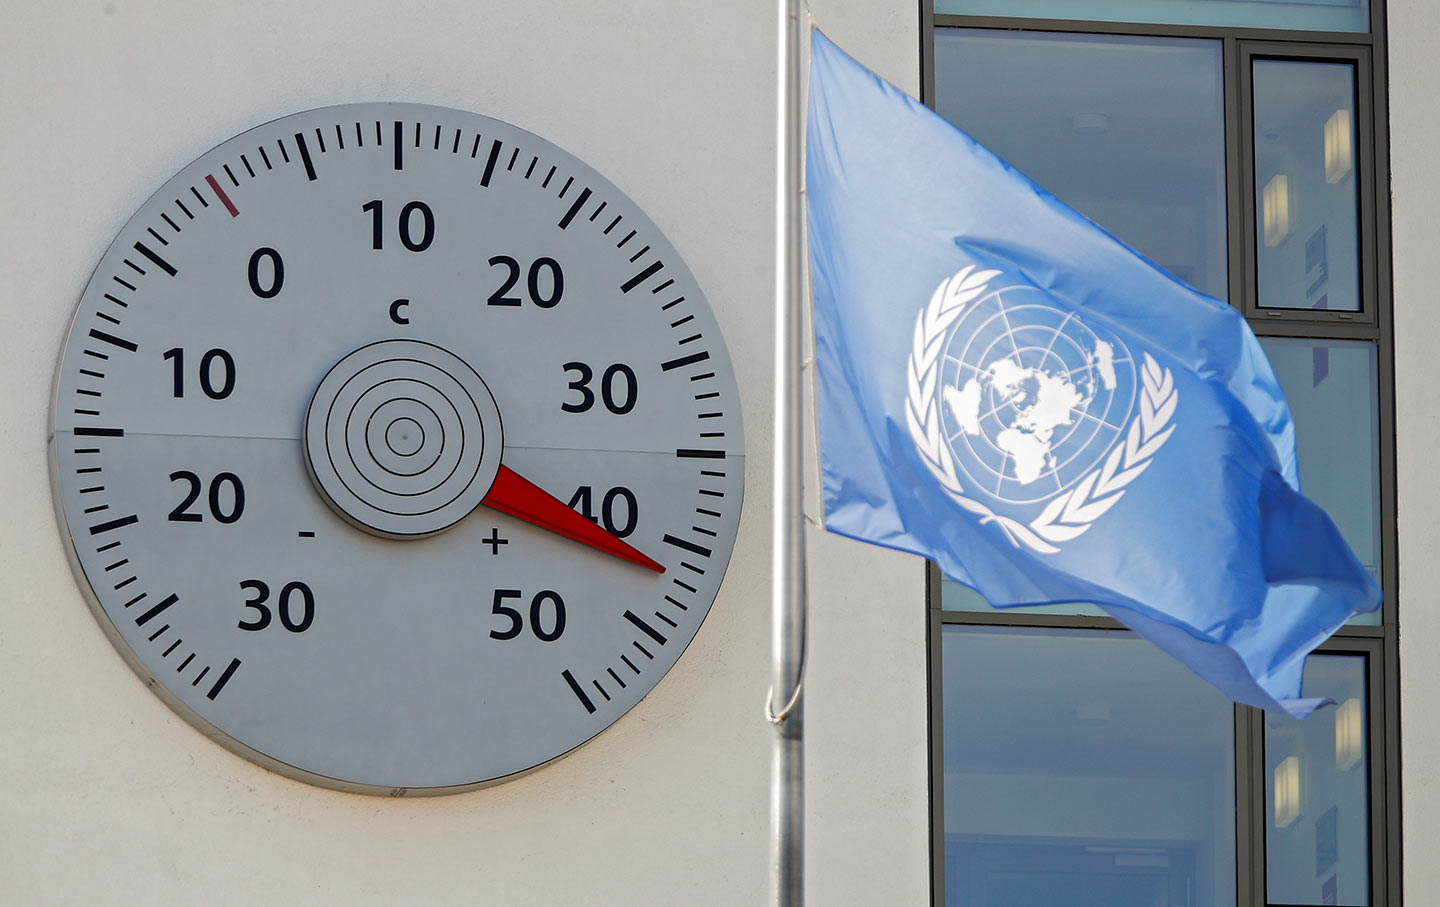 united-nations-thermometer-celsius-img